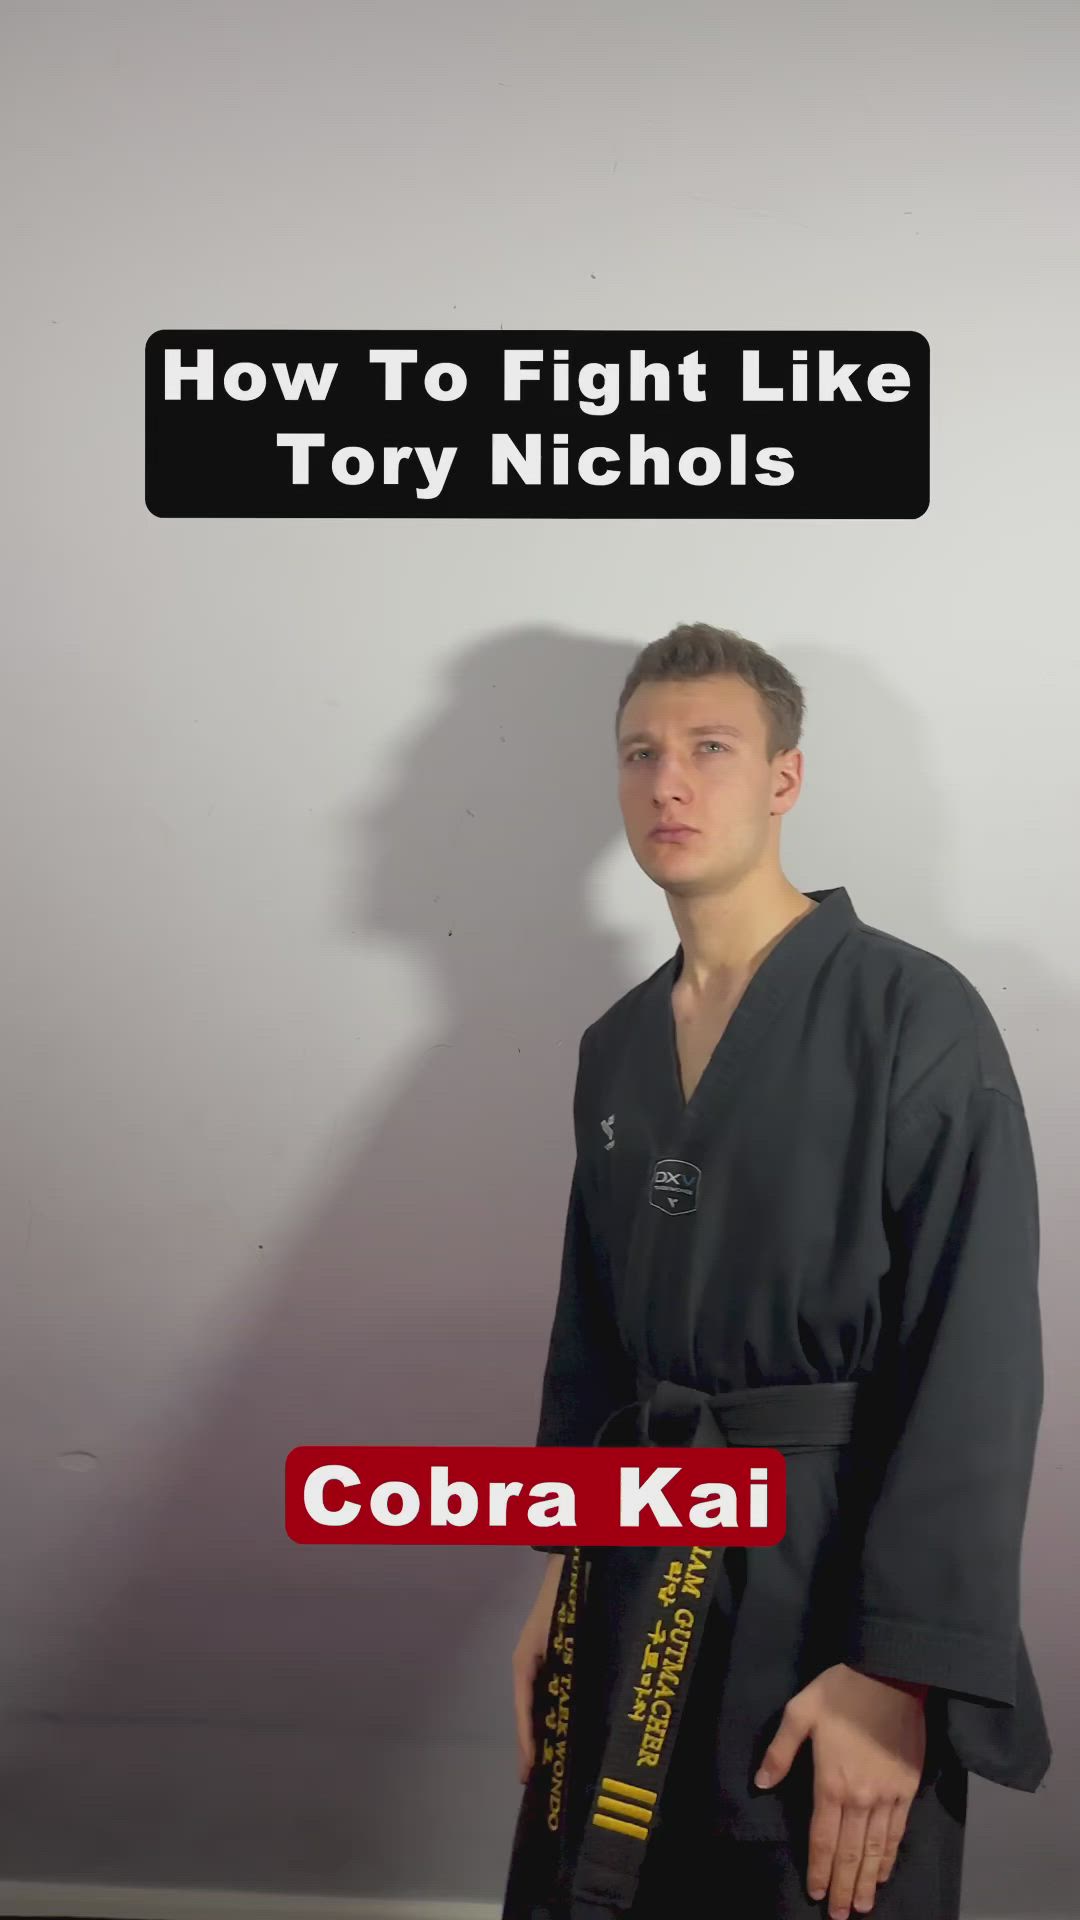 This contains an image of: How To Fight Like Tory Nichols | Cobra Kai